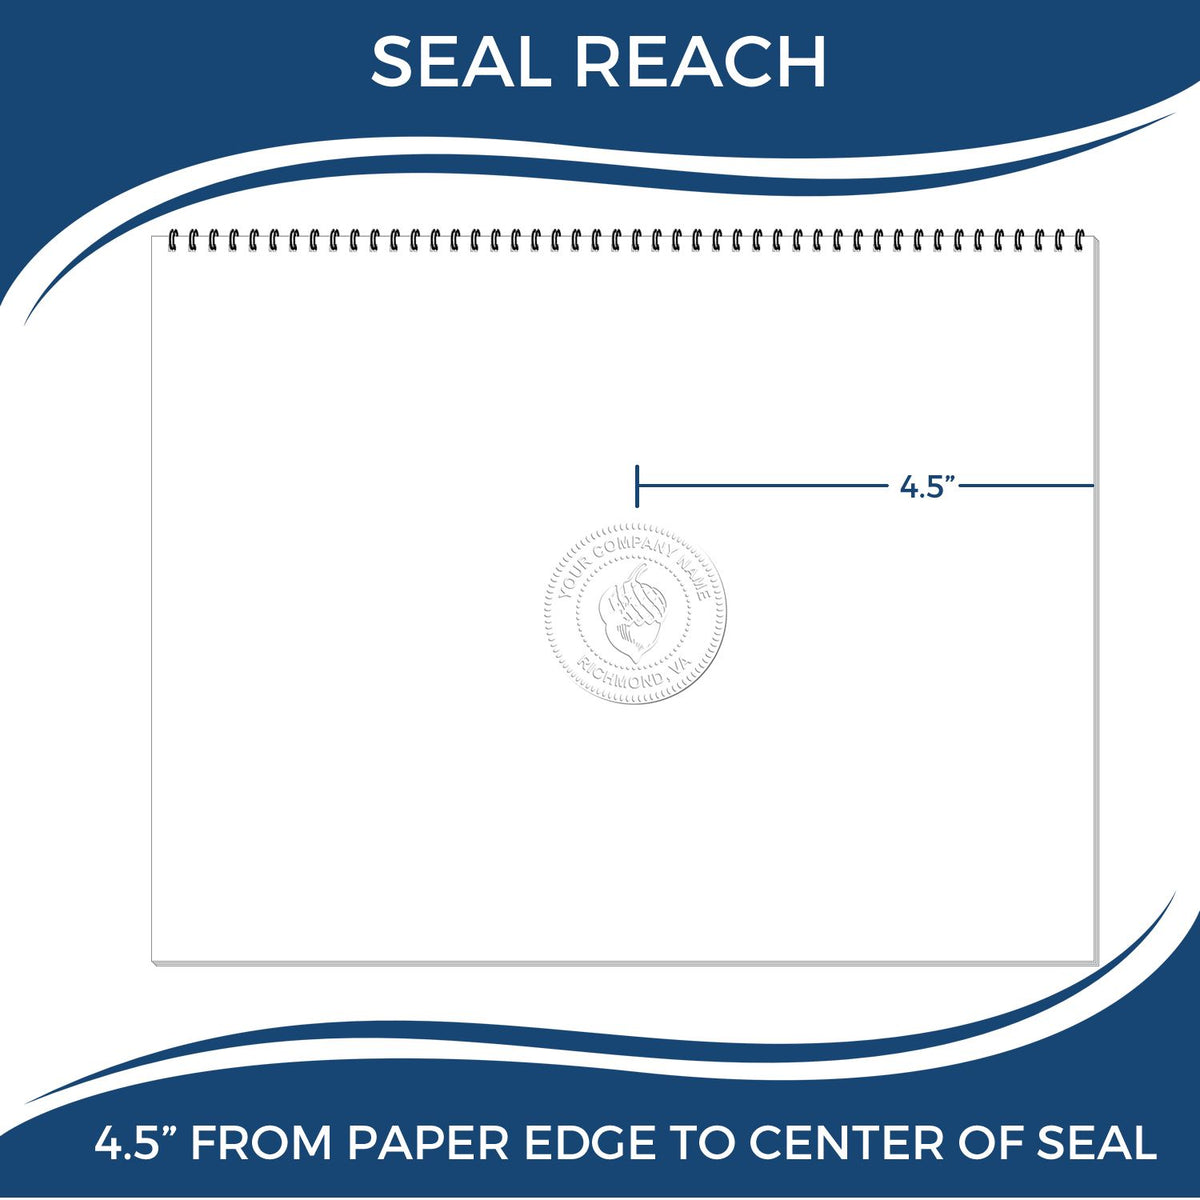 An infographic showing the seal reach which is represented by a ruler and a miniature seal image of the Extended Long Reach Idaho Surveyor Embosser